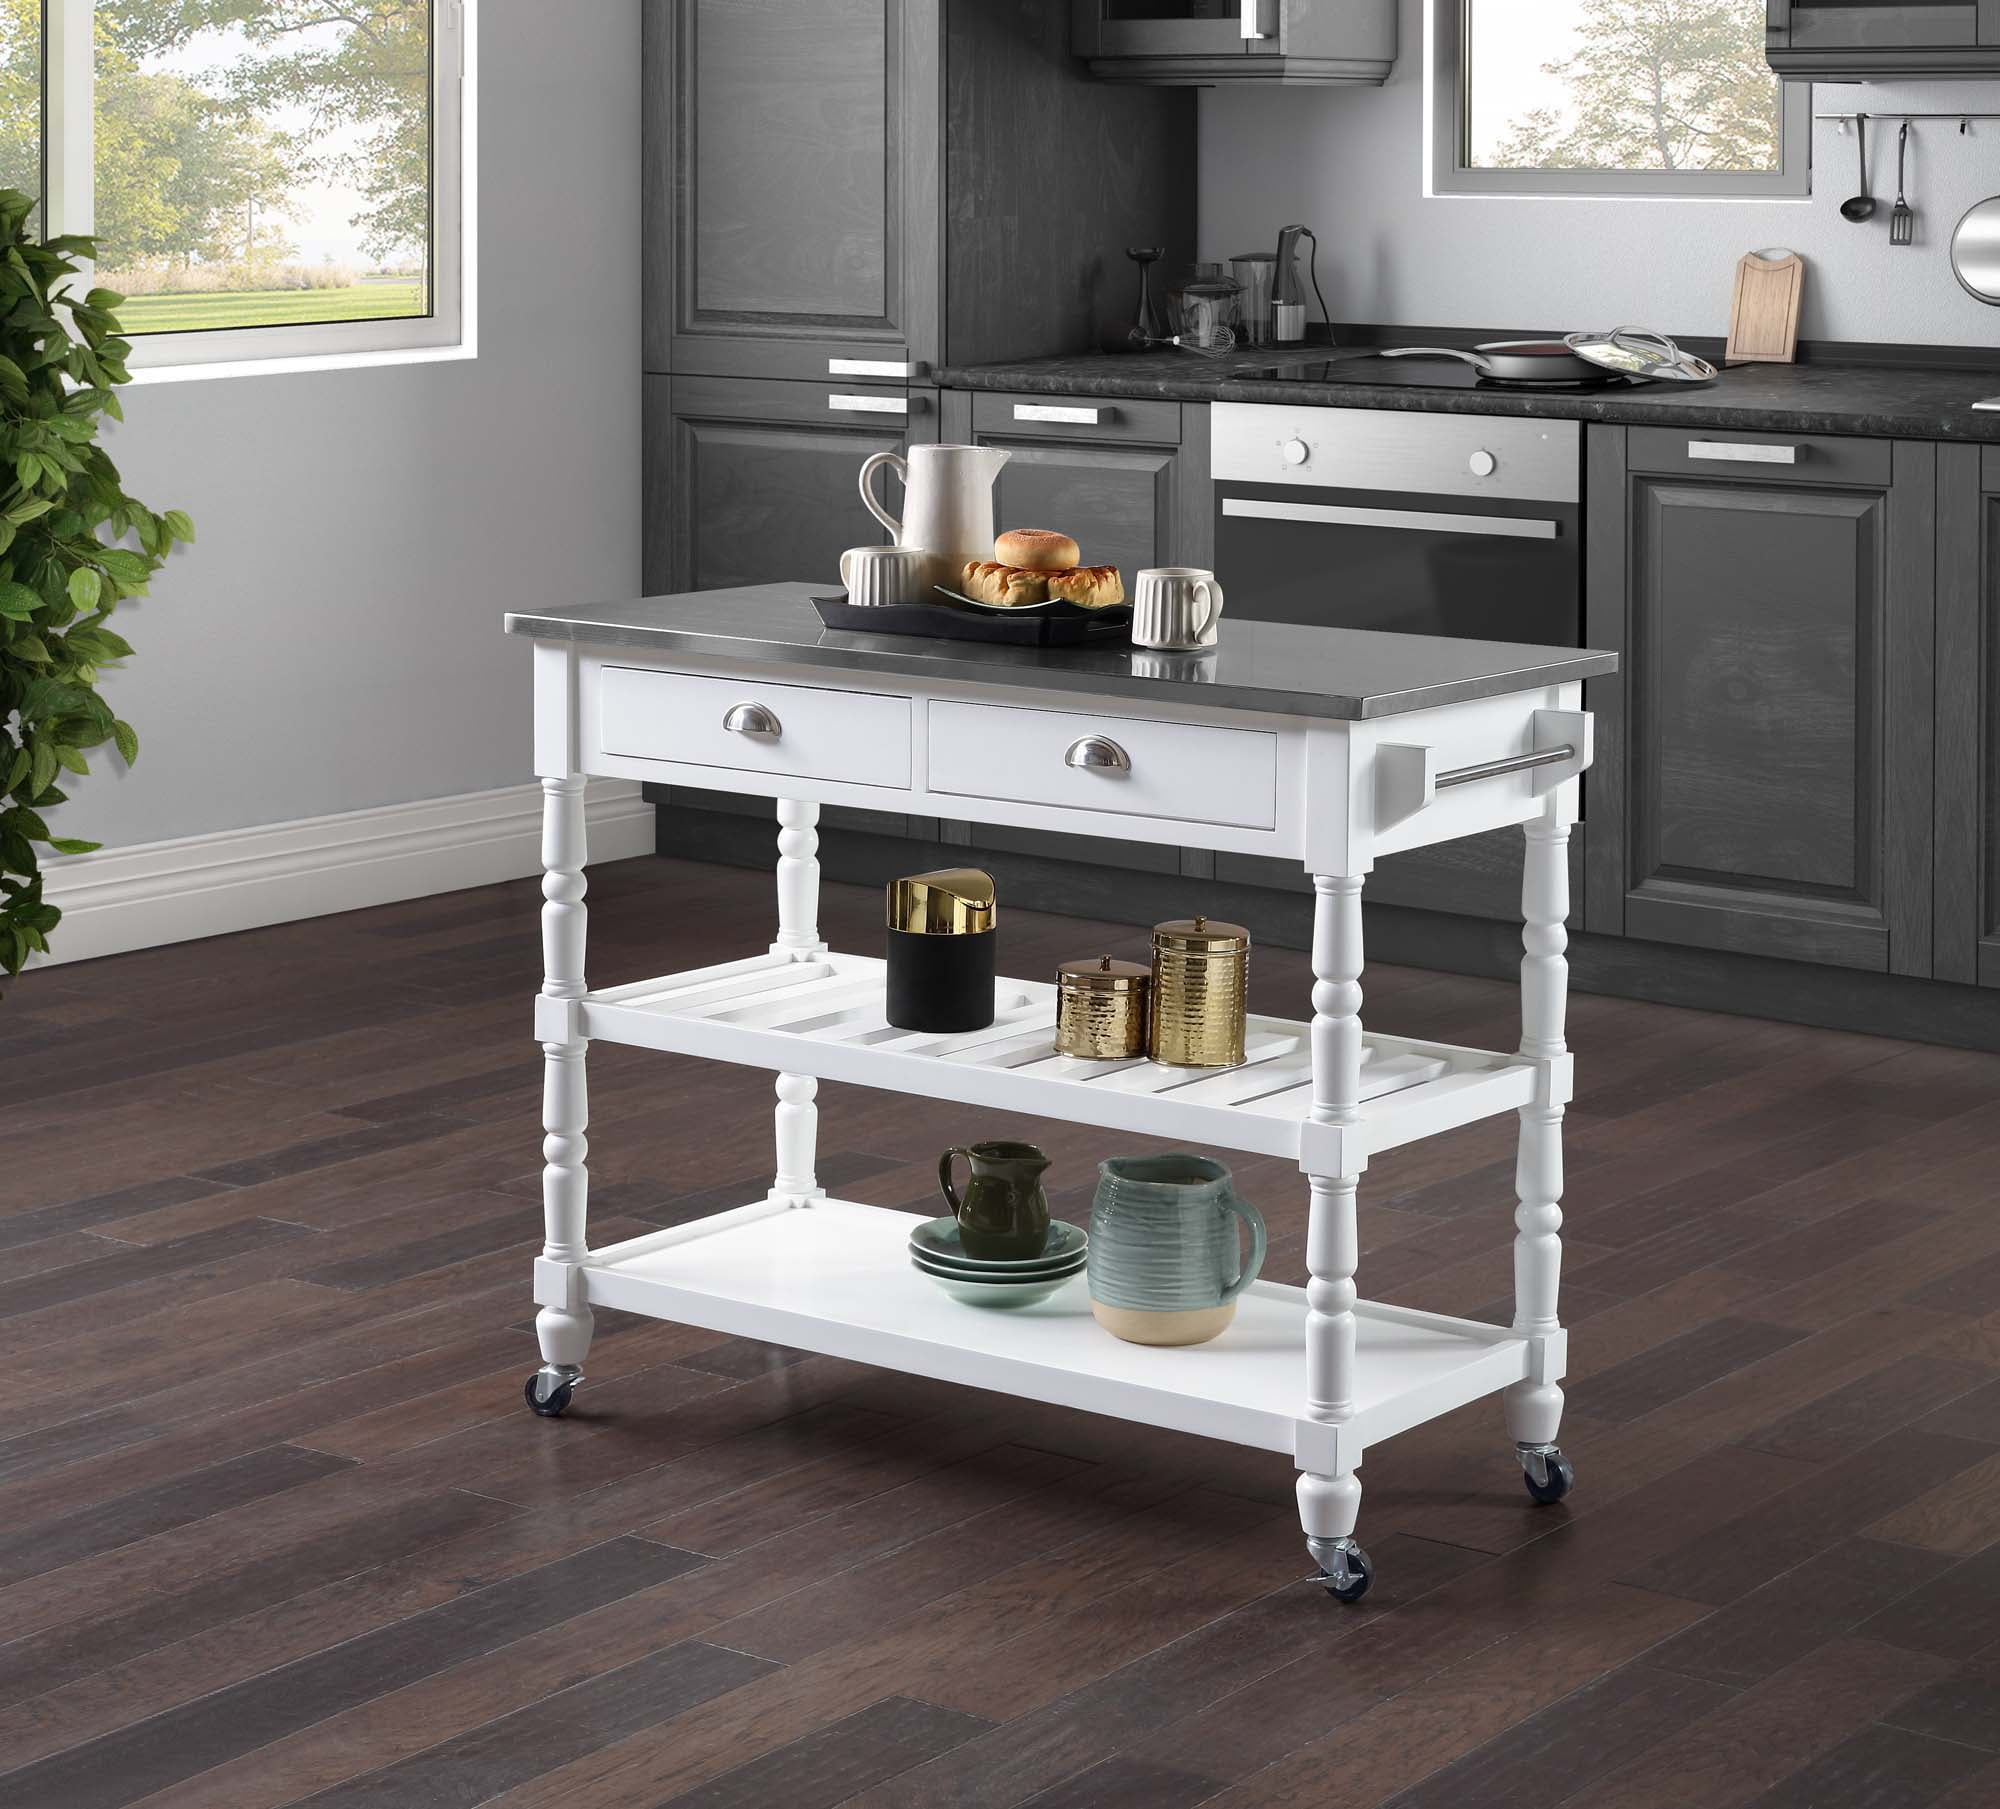 Picture of Convenience Concepts 802235W French Country 3 Tier Stainless Steel Kitchen Cart with Drawers - Stainless Steel/White